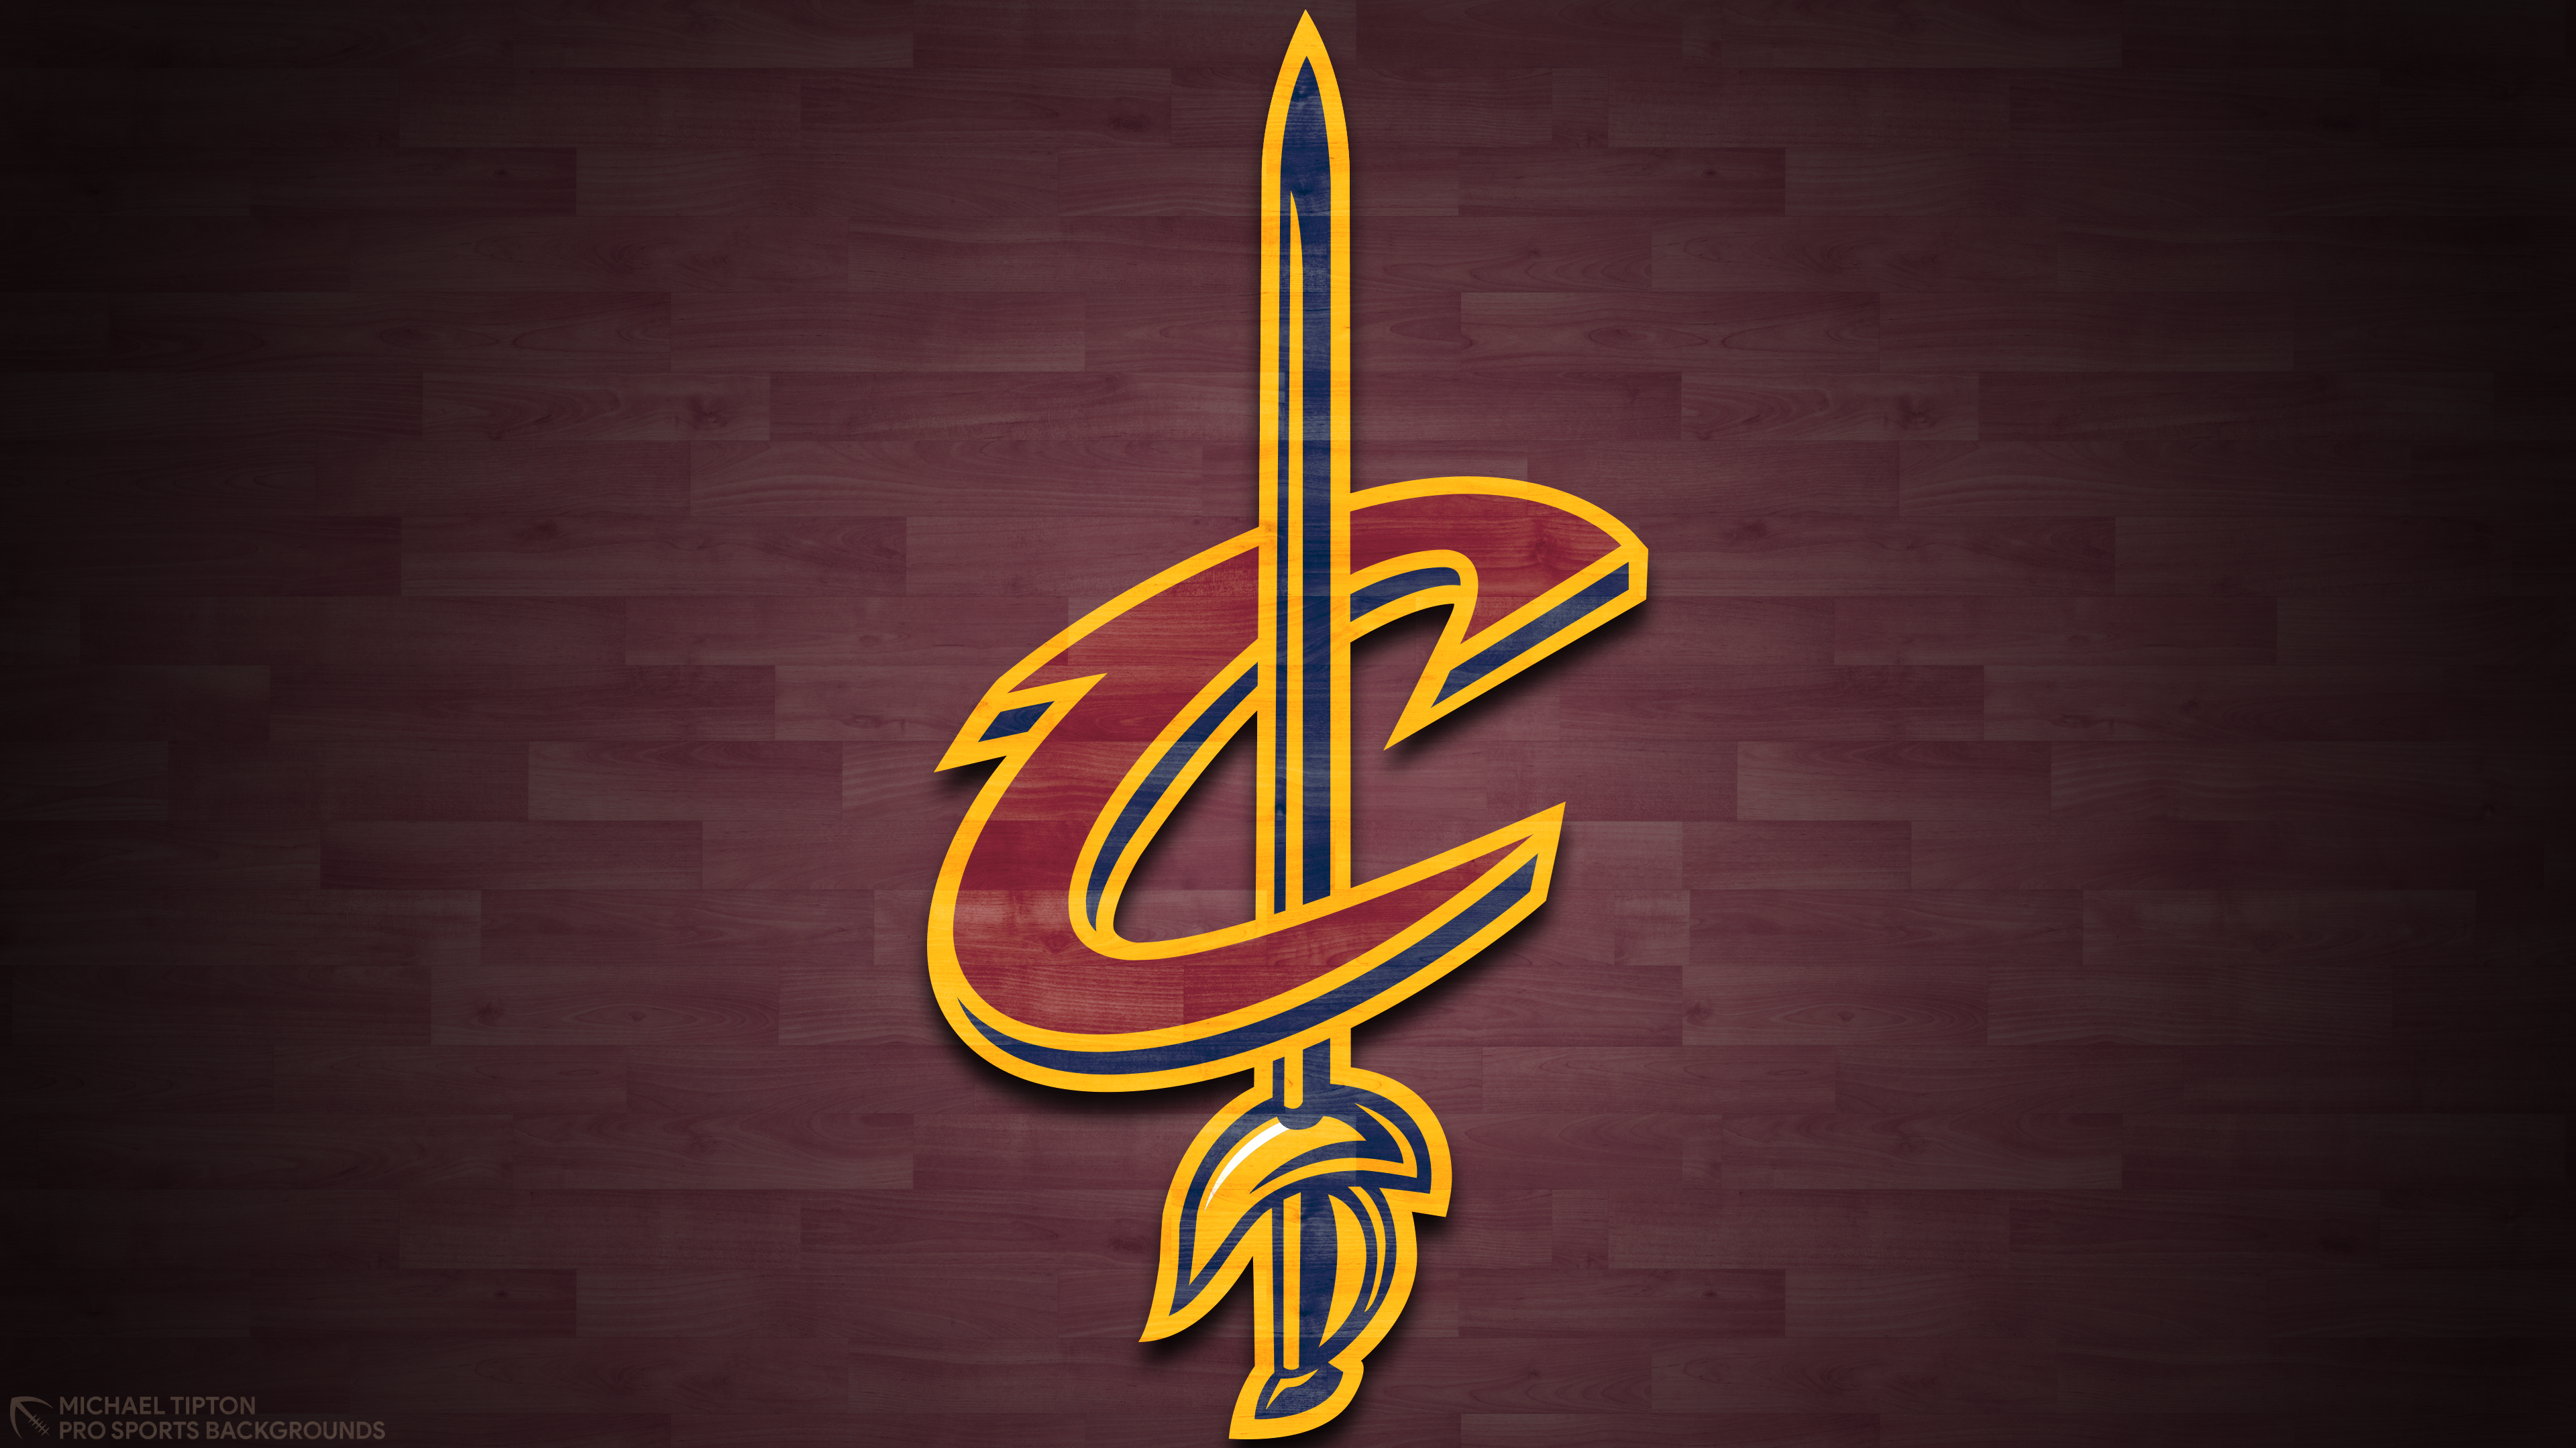 Cleveland Cavaliers 4k Ultra HD Wallpaper By Michael Tipton